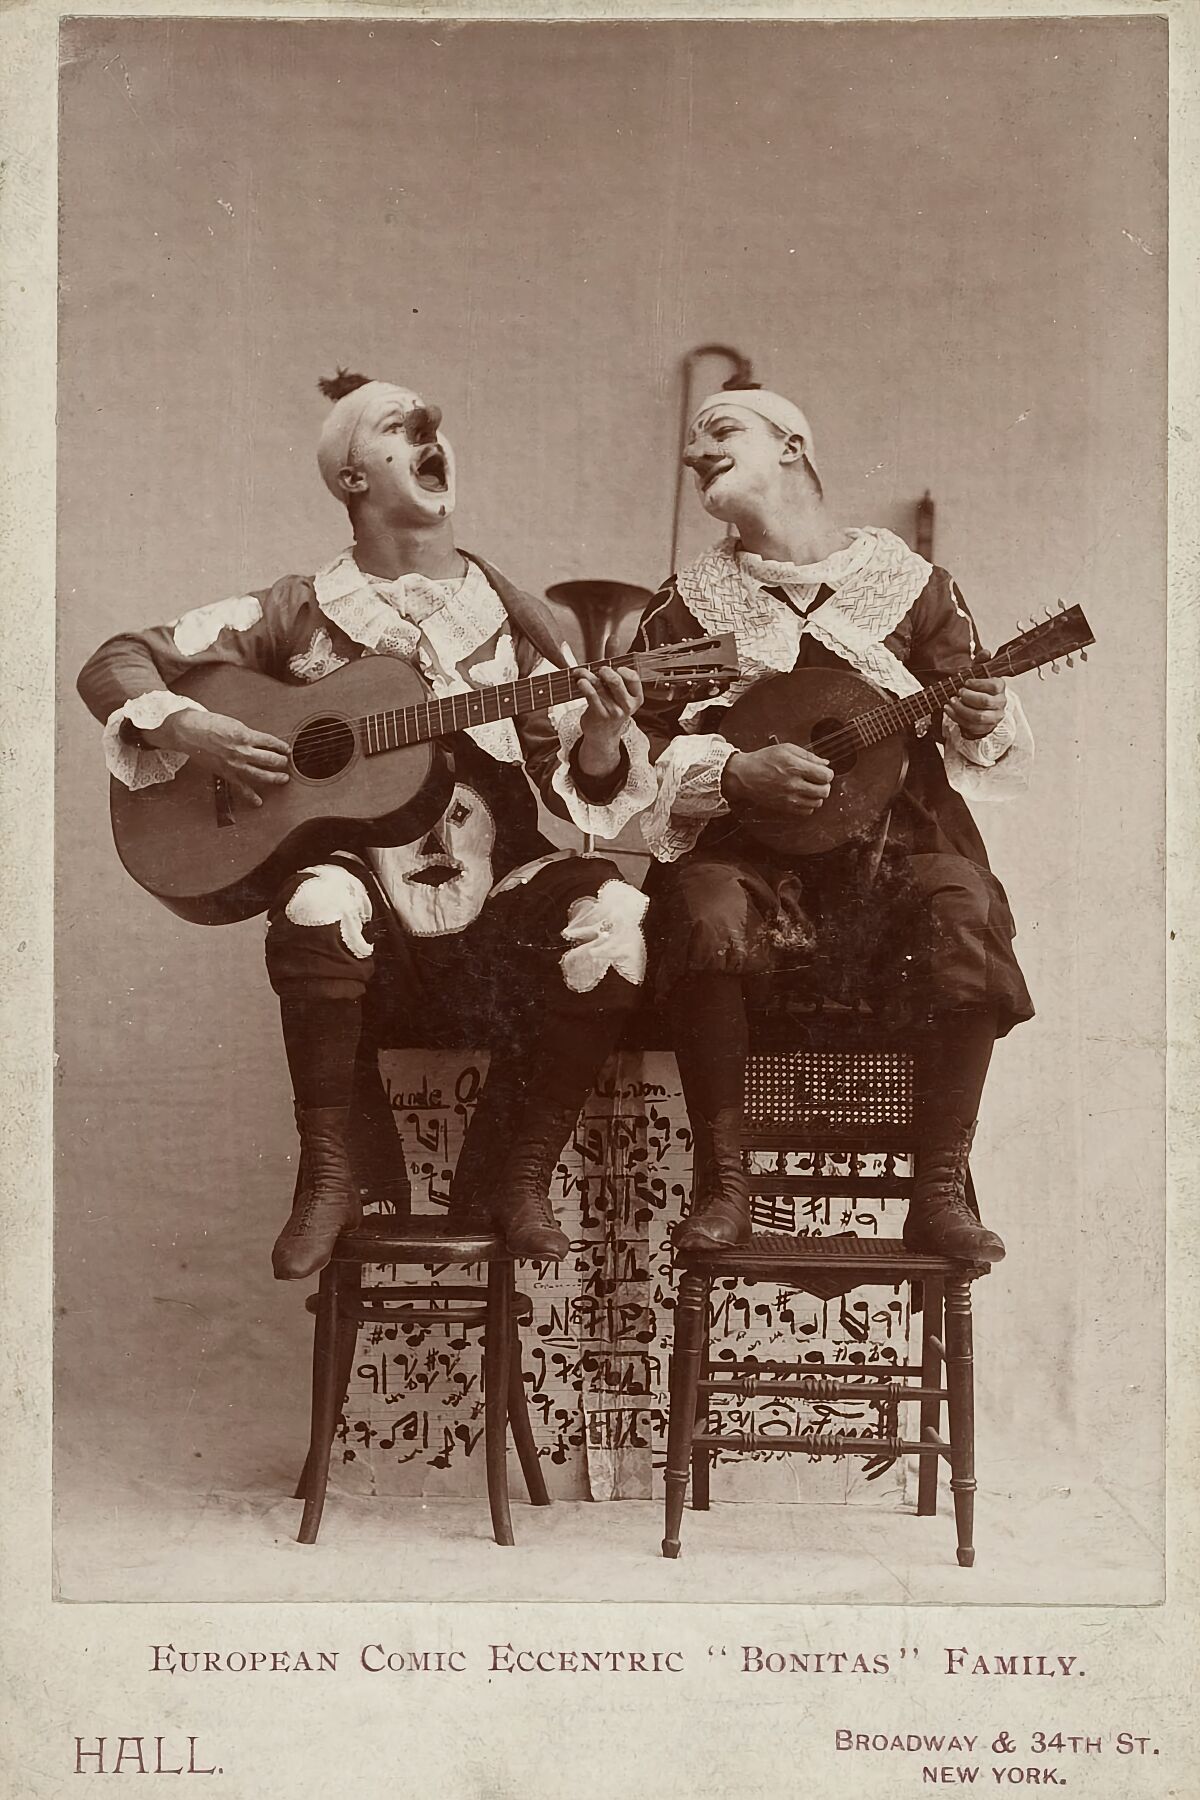 Cabinet card image of two performers playing stringed instruments. Labeled 'European comic eccentric 'Bonitas' family'.  Harvard Theatre Collection, Harvard University 1918 or earlier